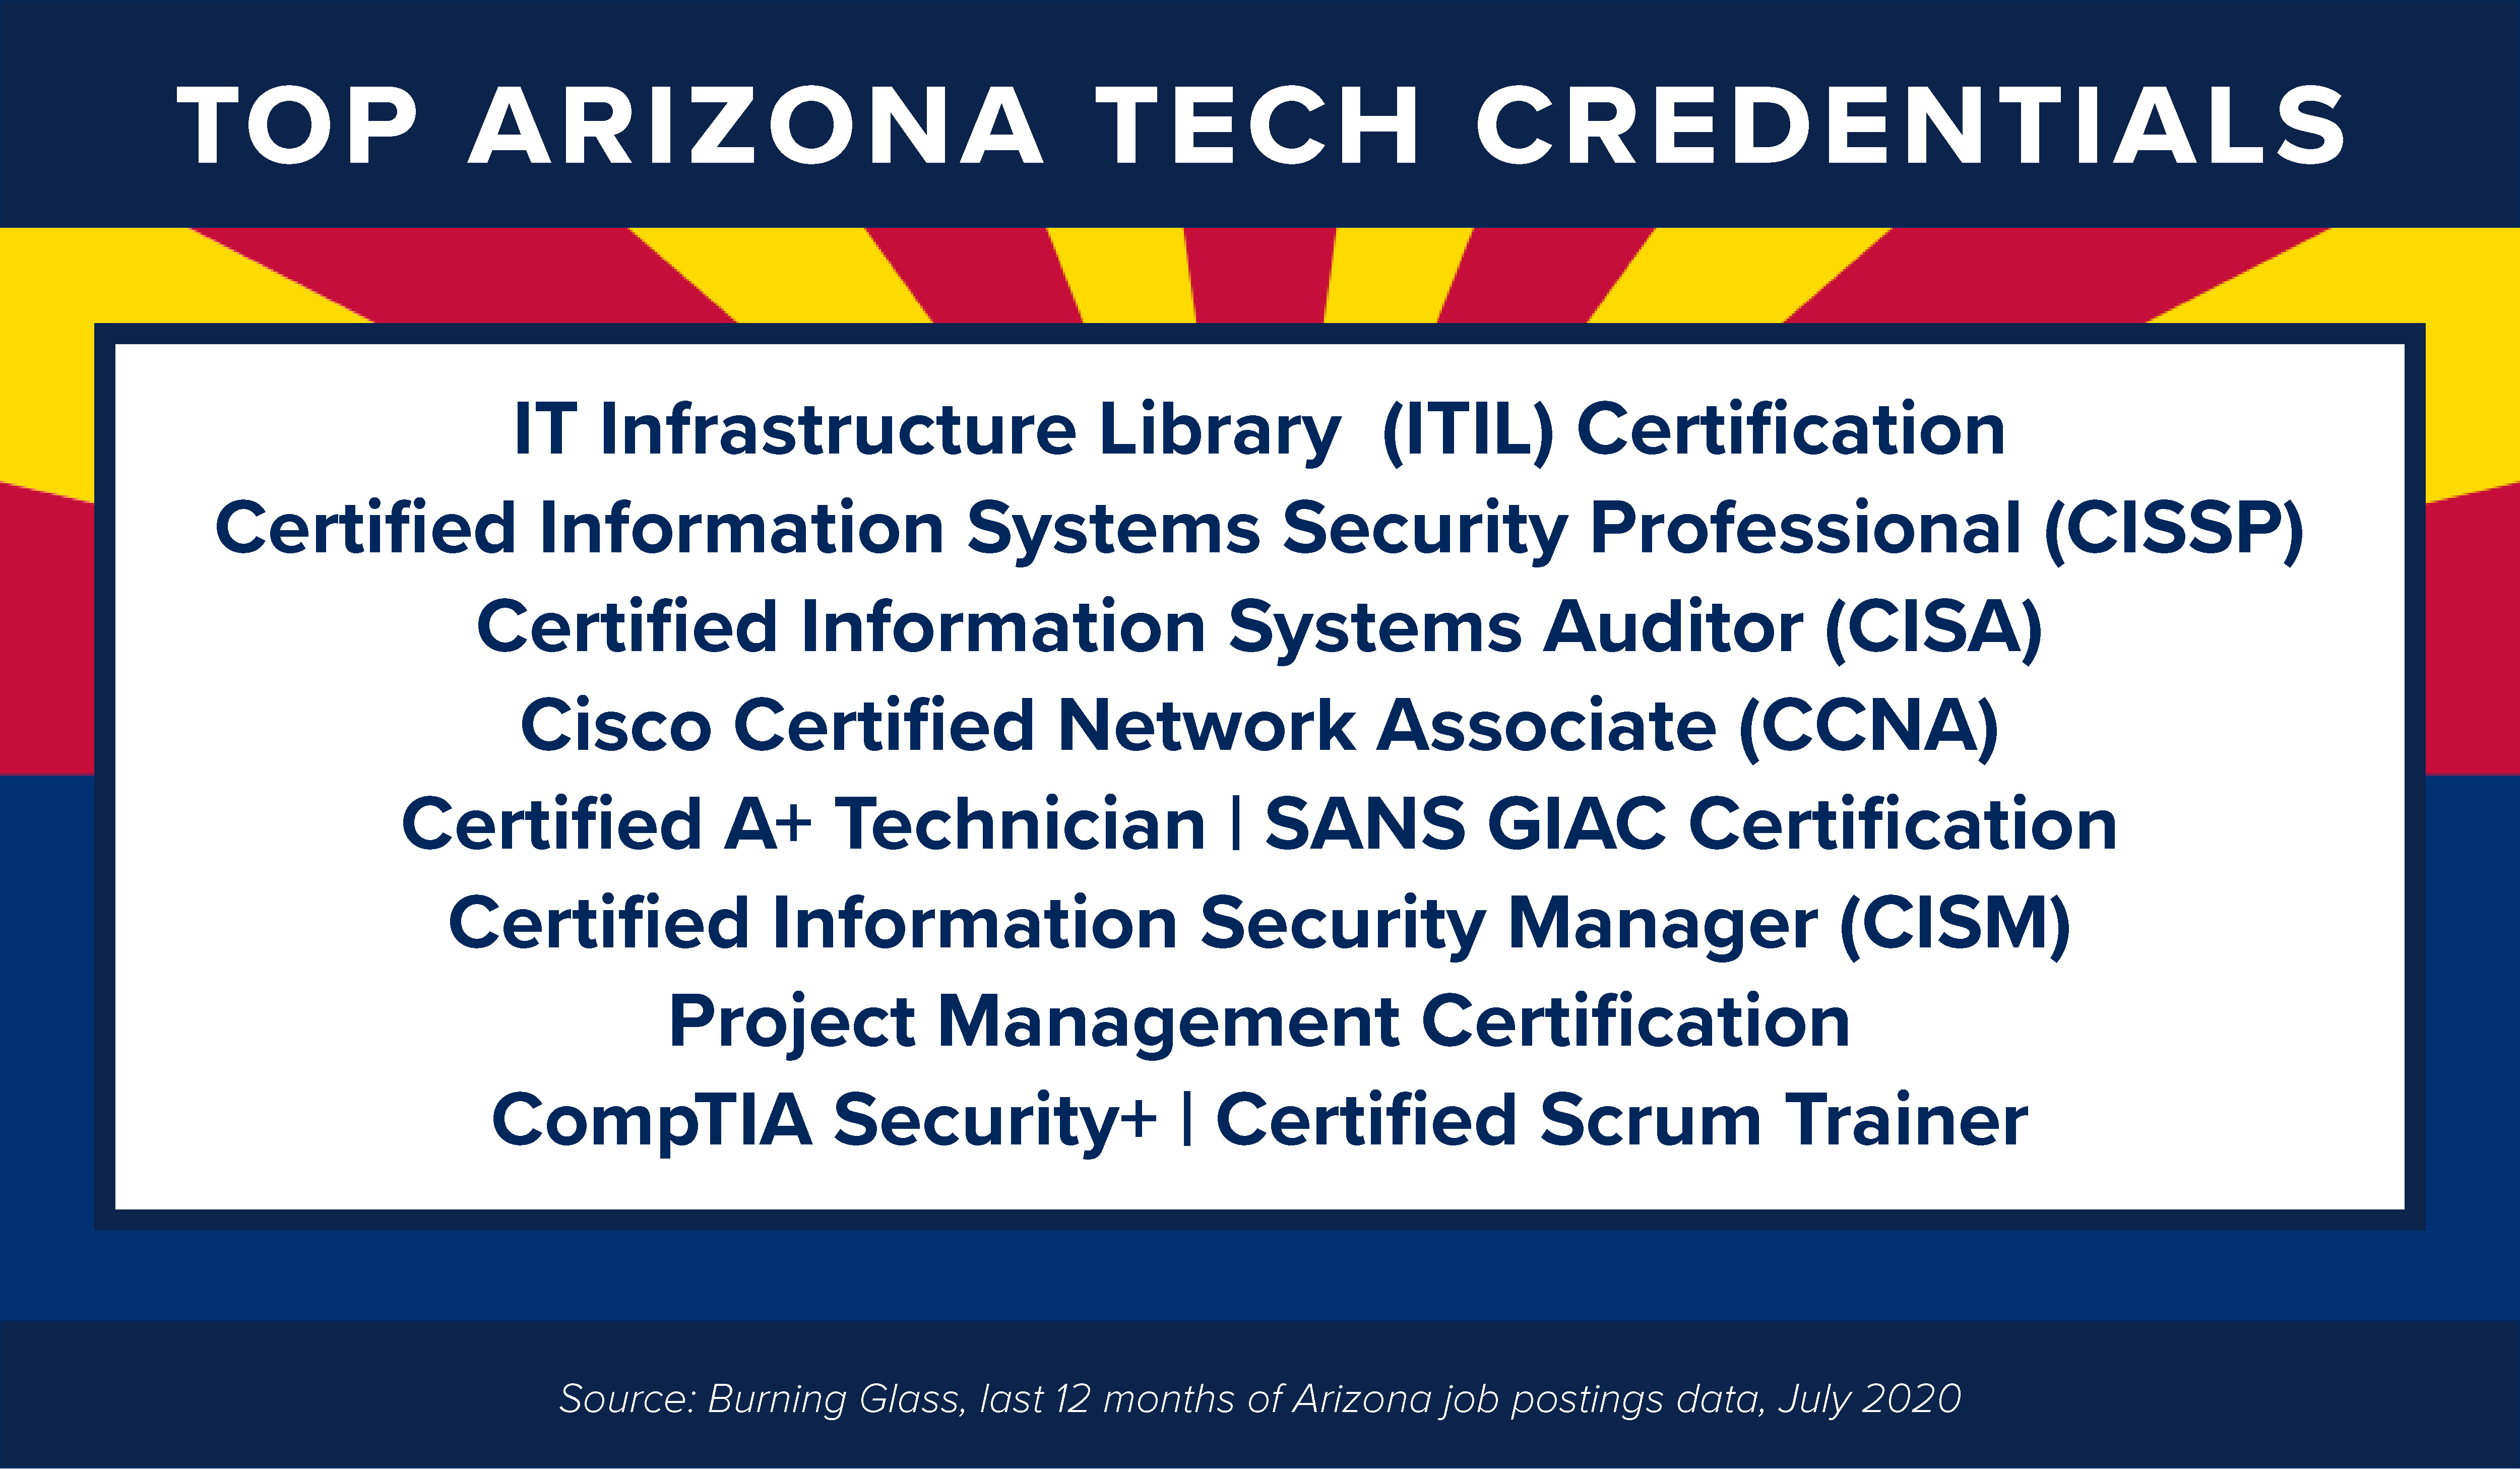  IT Infrastructure Library  (ITIL) Certification, Certified Information Systems Security Professional (CISSP), Certified Information Systems Auditor (CISA), Cisco Certified Network Associate (CCNA), Certified A+ Technician, SANS GIAC Certification, Certified Information Security Manager (CISM), Project Management Certification, CompTIA Security+ and Certified Scrum Trainer